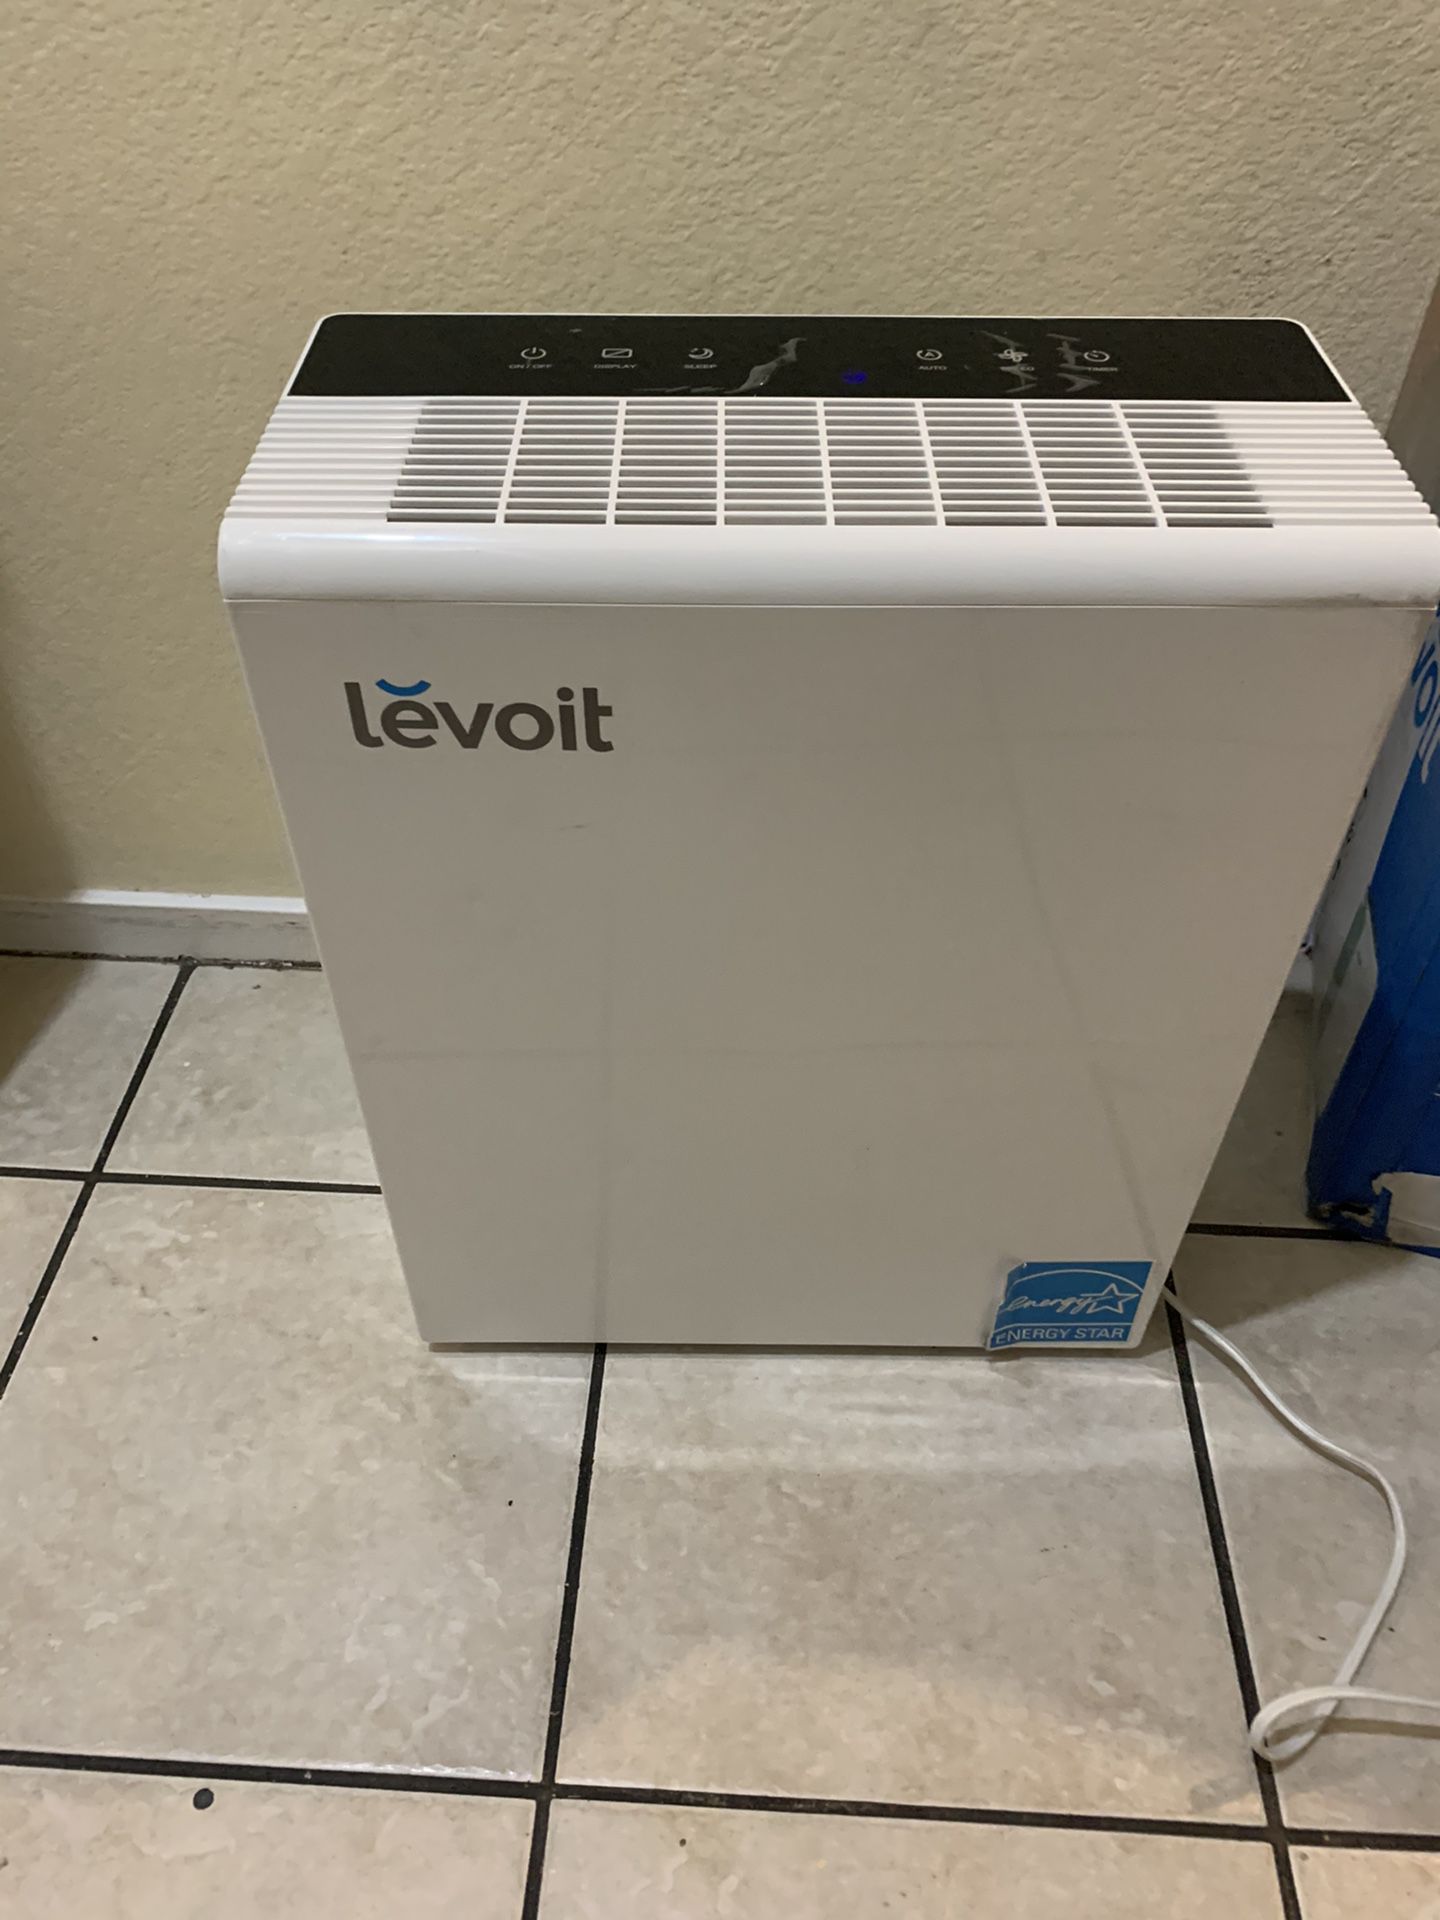 Levoit true HEPA console air purifier WiFi connect like new open box excellent working condition in original packaging